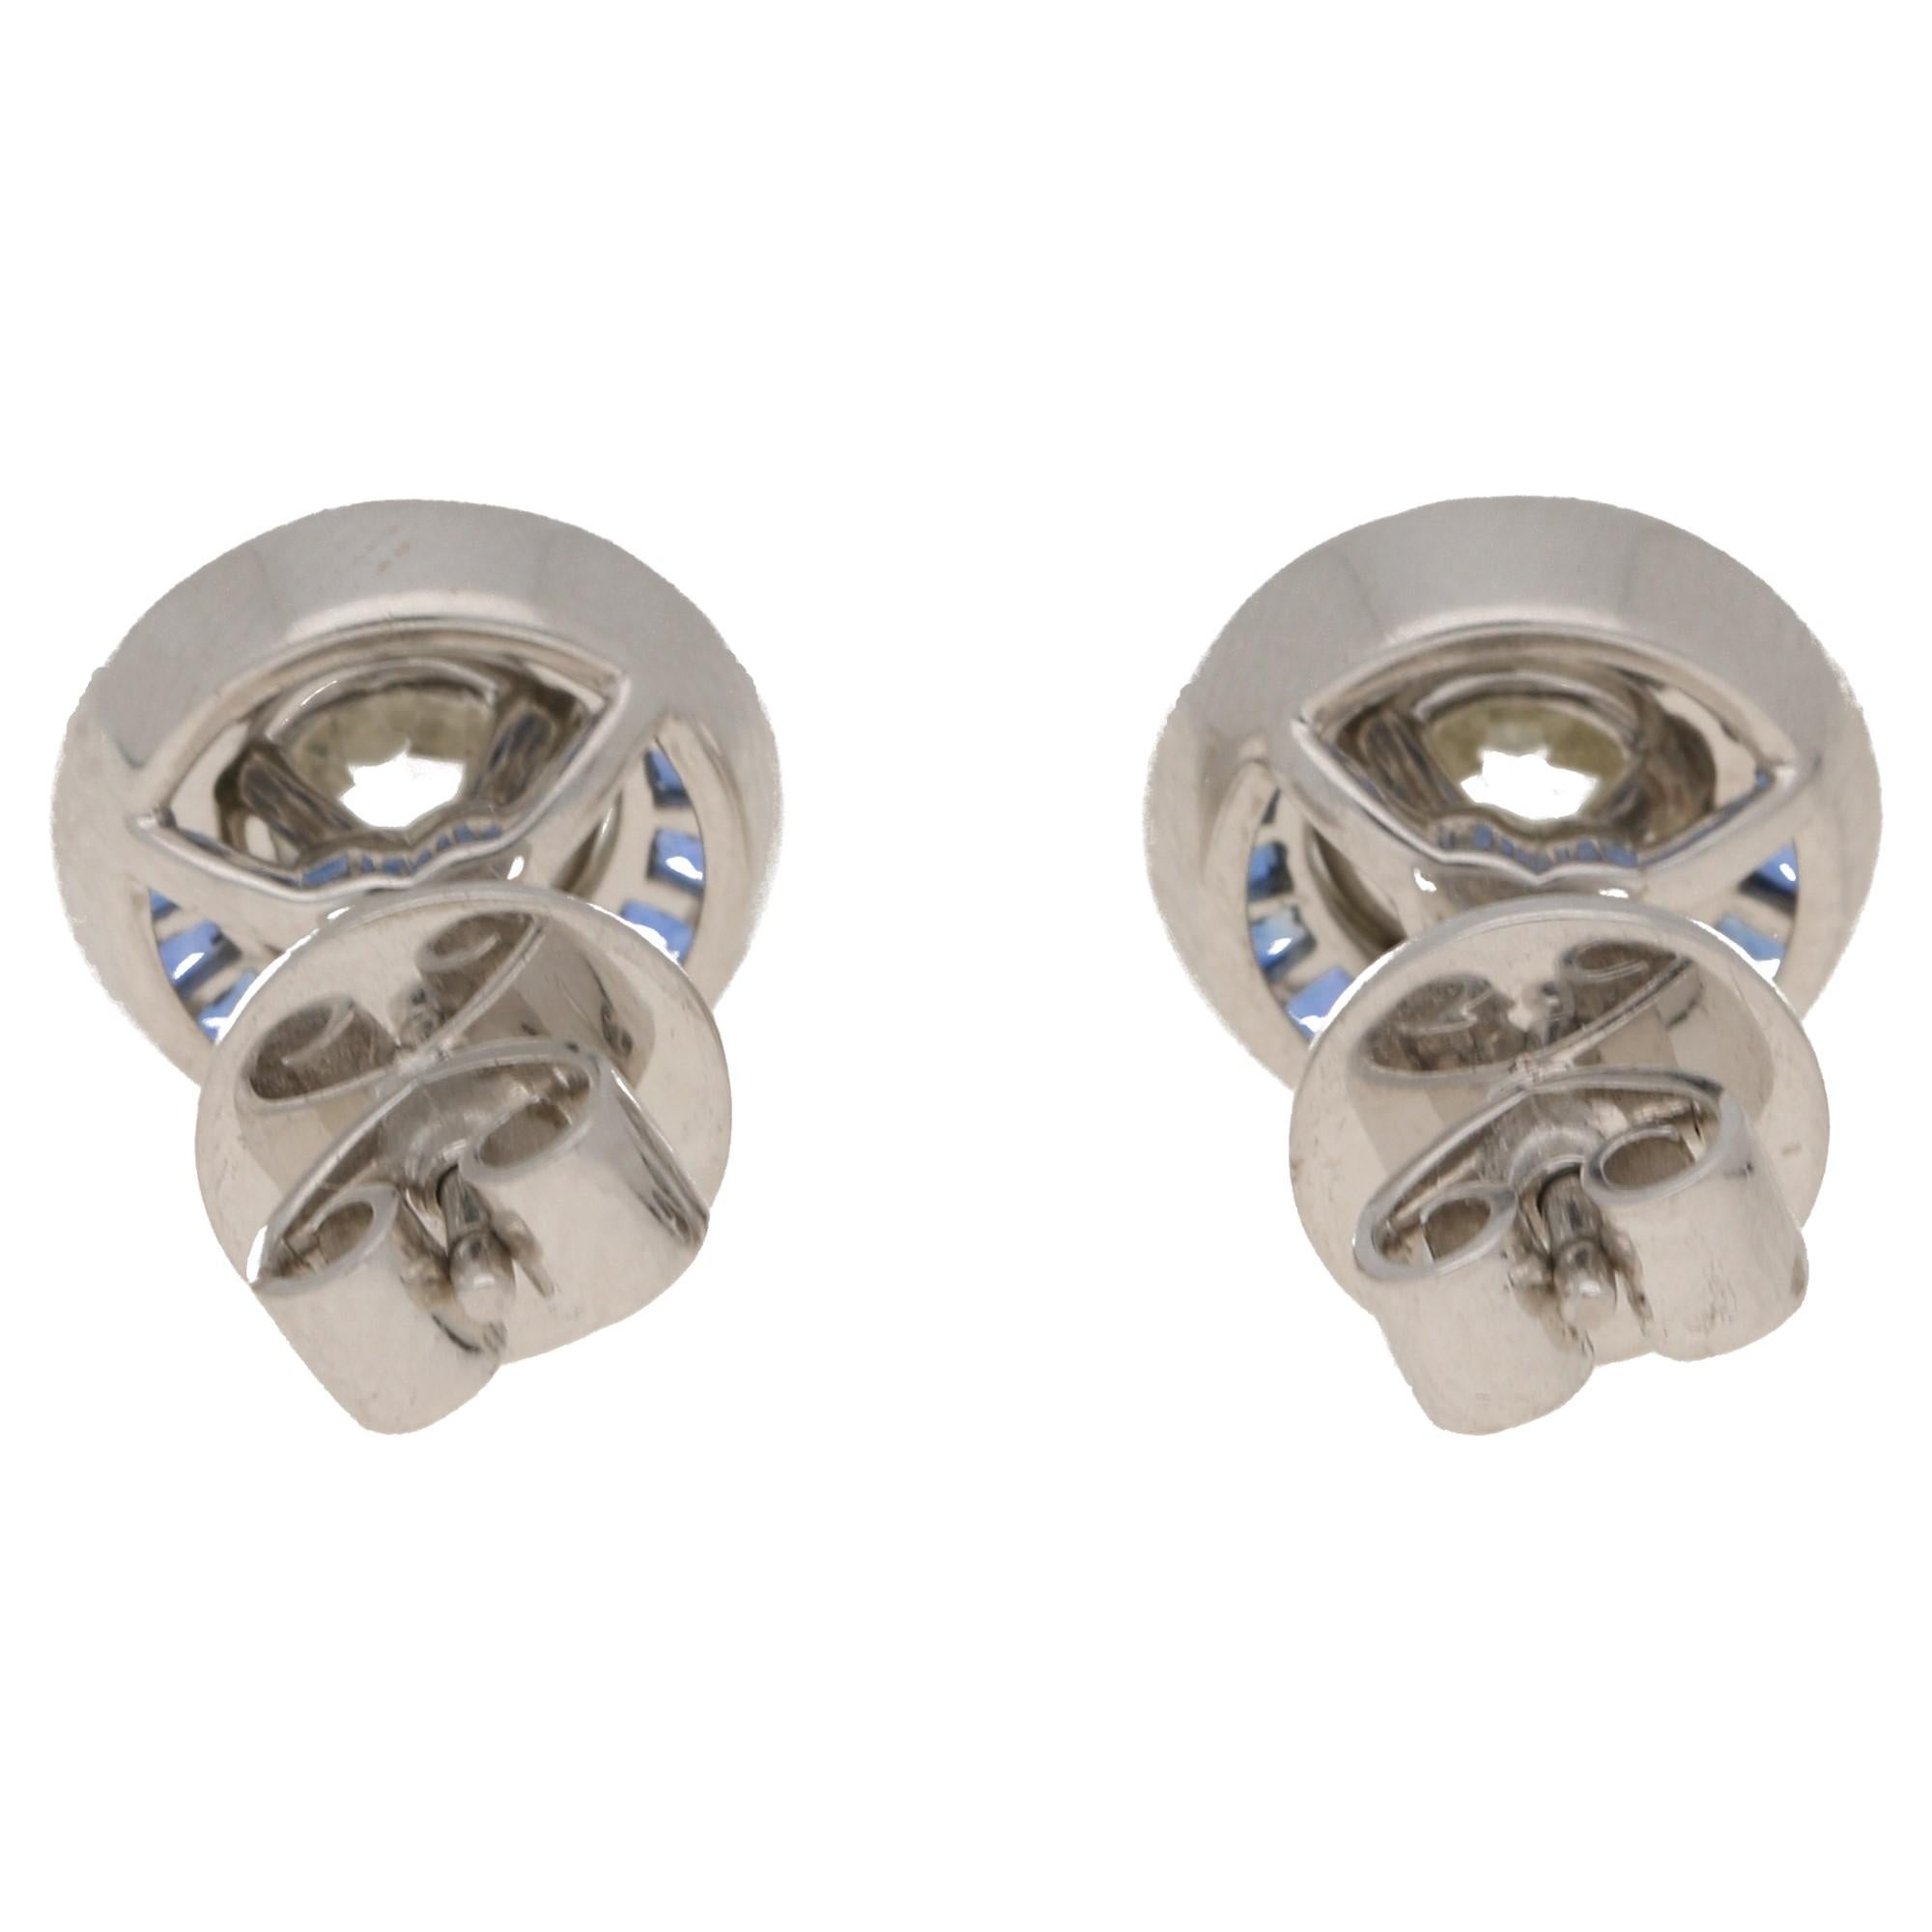 A distinctive pair of convertible diamond and sapphire stud earrings in platinum. With a Deco-inspired target design, these earrings feature a three claw-set Old European brilliant-cut diamond each with a combined weight of 2.09 carats, J/K colour